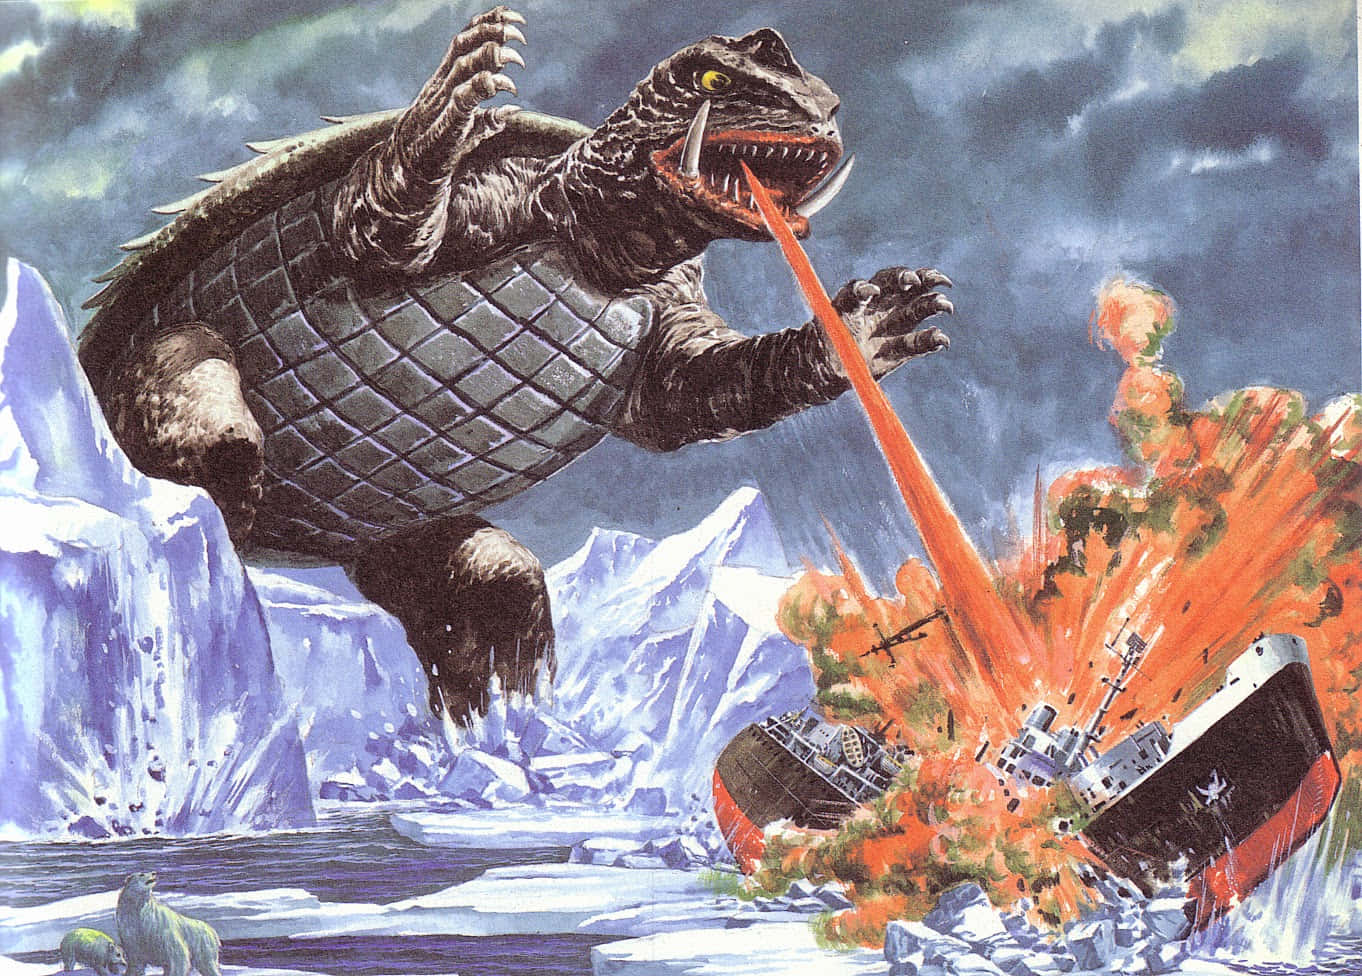 The mighty Gamera unleashing his power during an epic battle Wallpaper